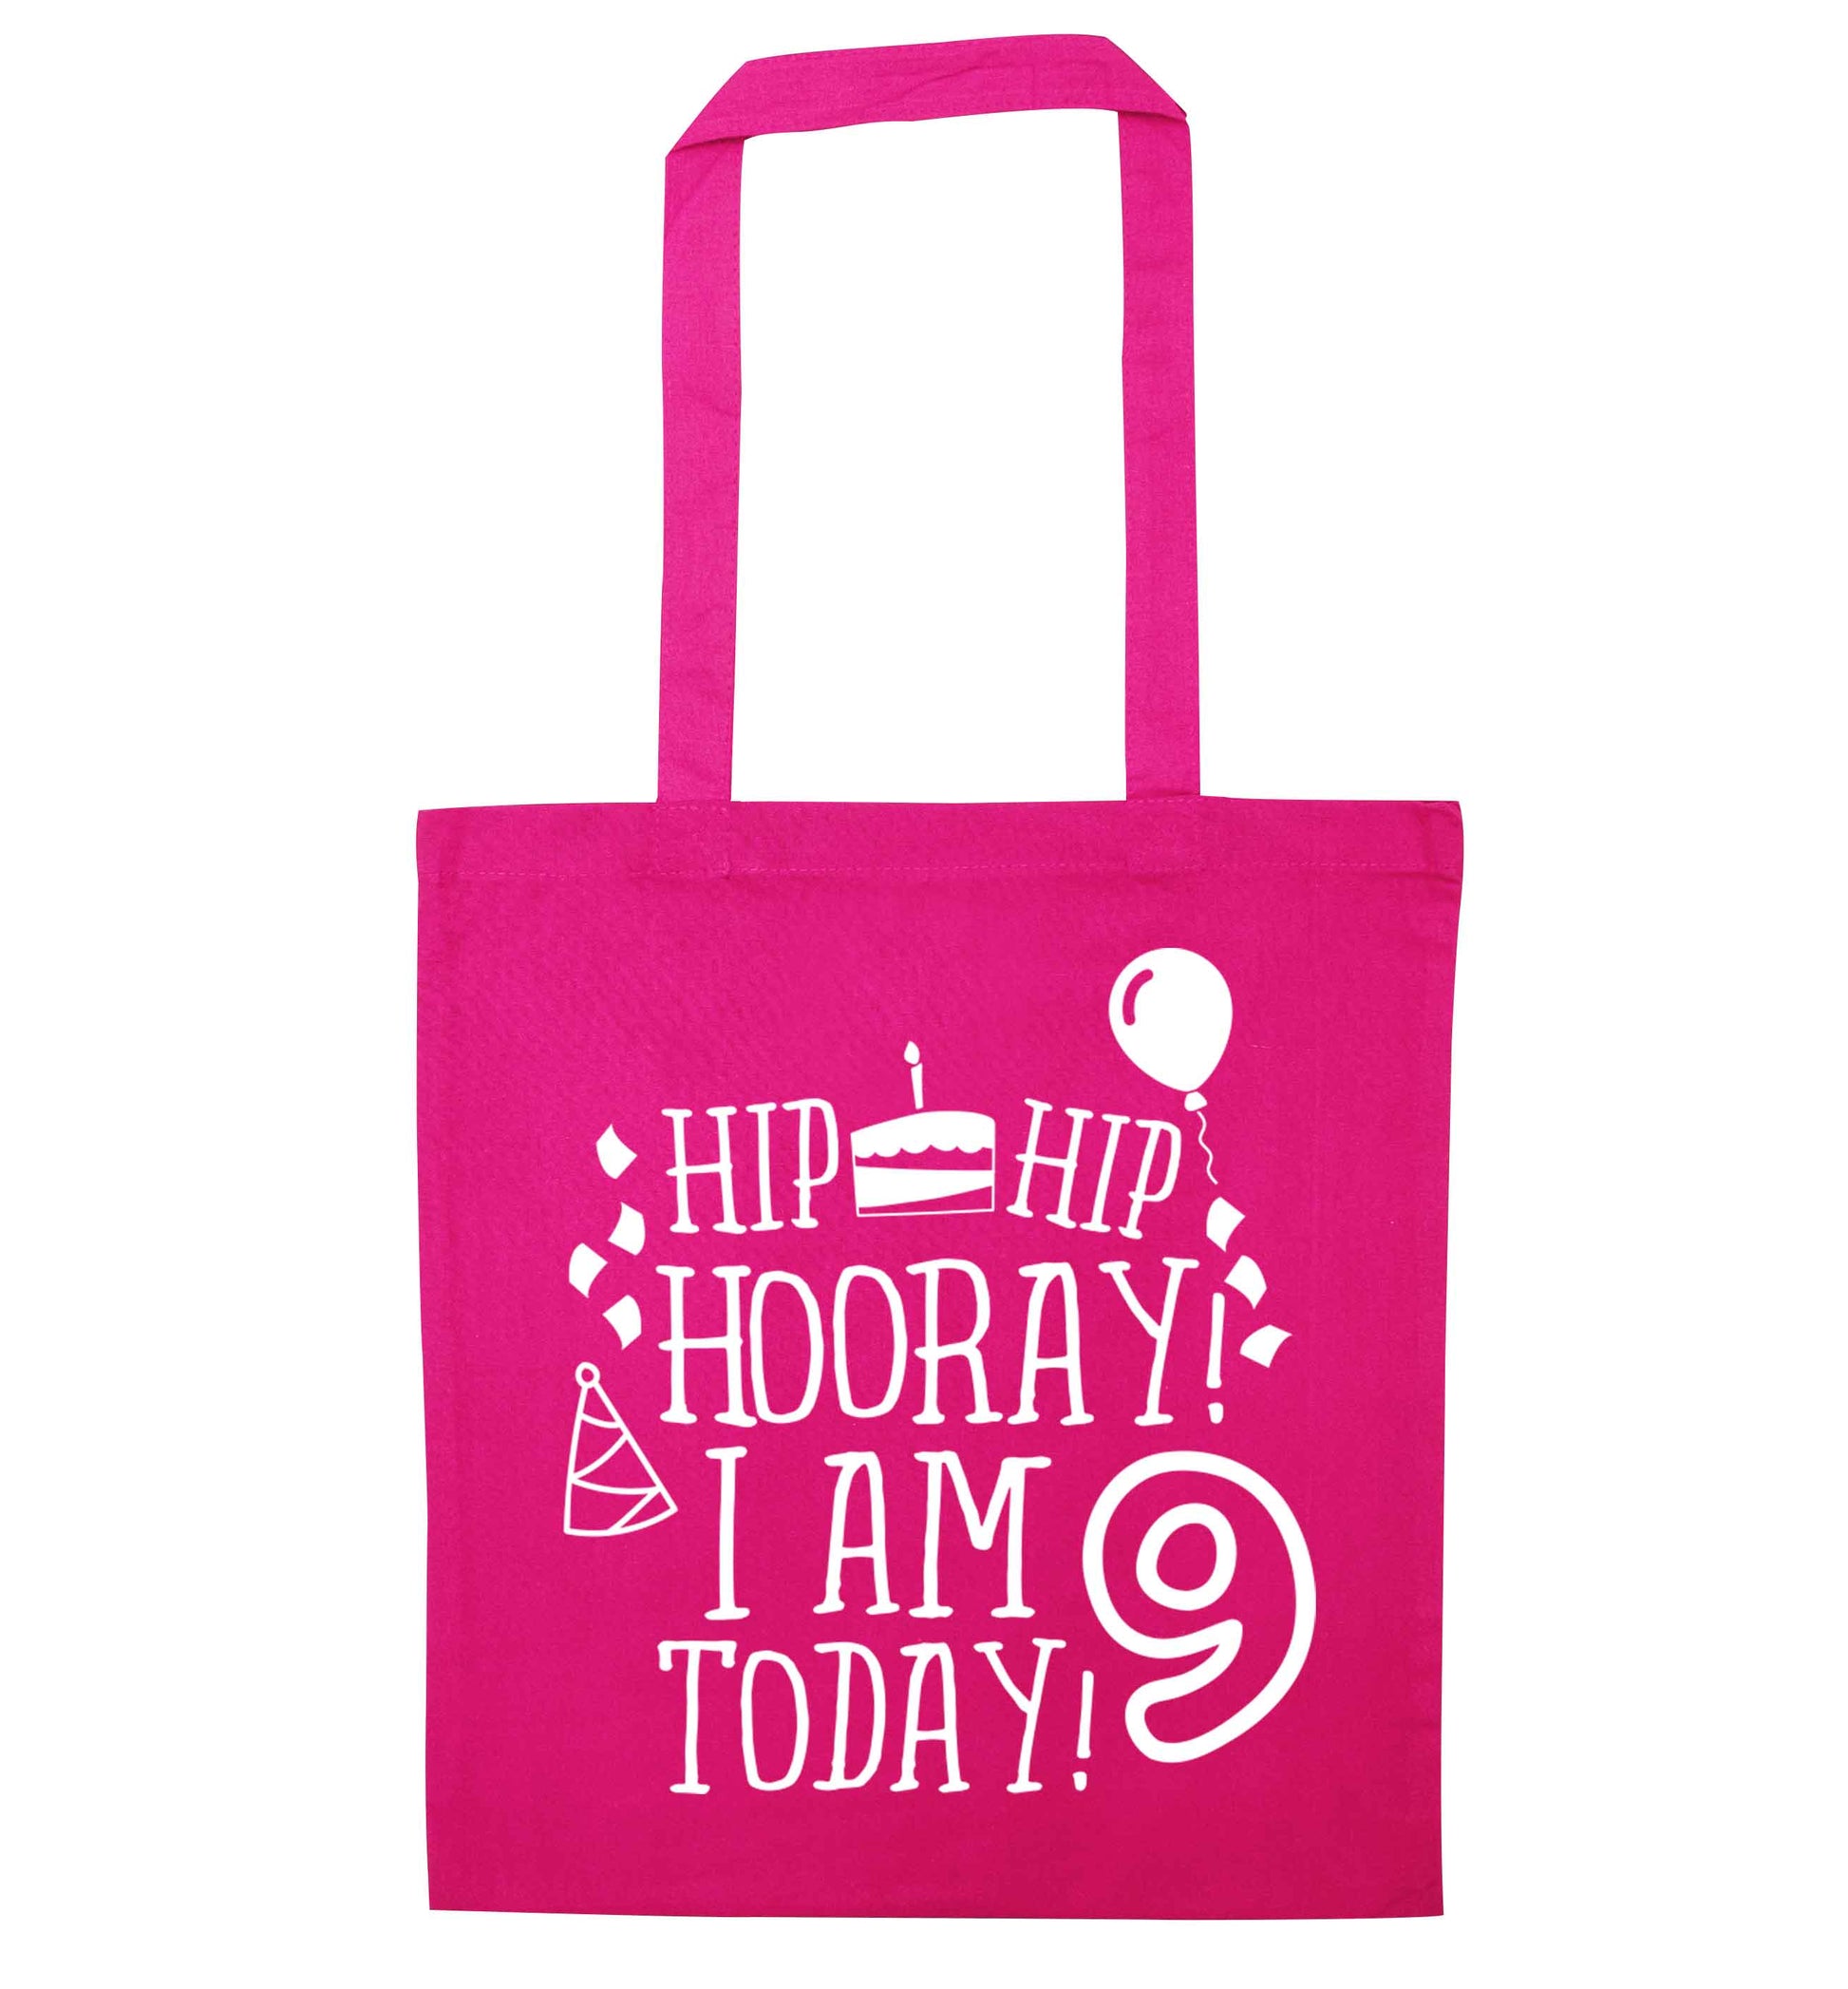 Hip hip hooray I am 9 today! pink tote bag